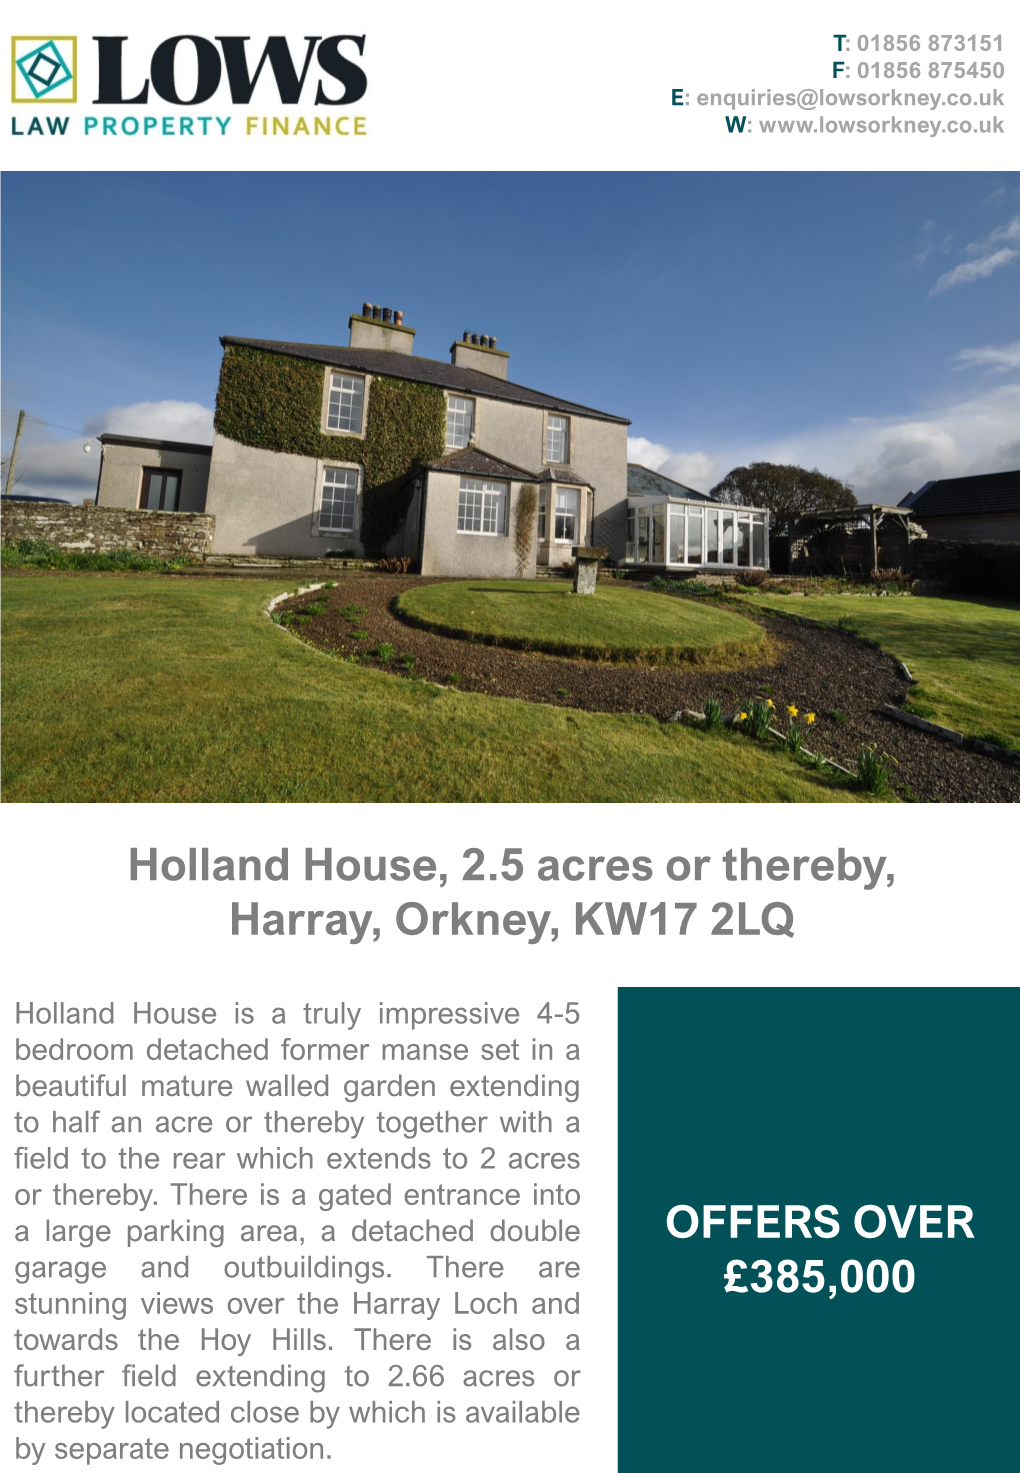 Holland House, 2.5 Acres Or Thereby, Harray, Orkney, KW17 2LQ